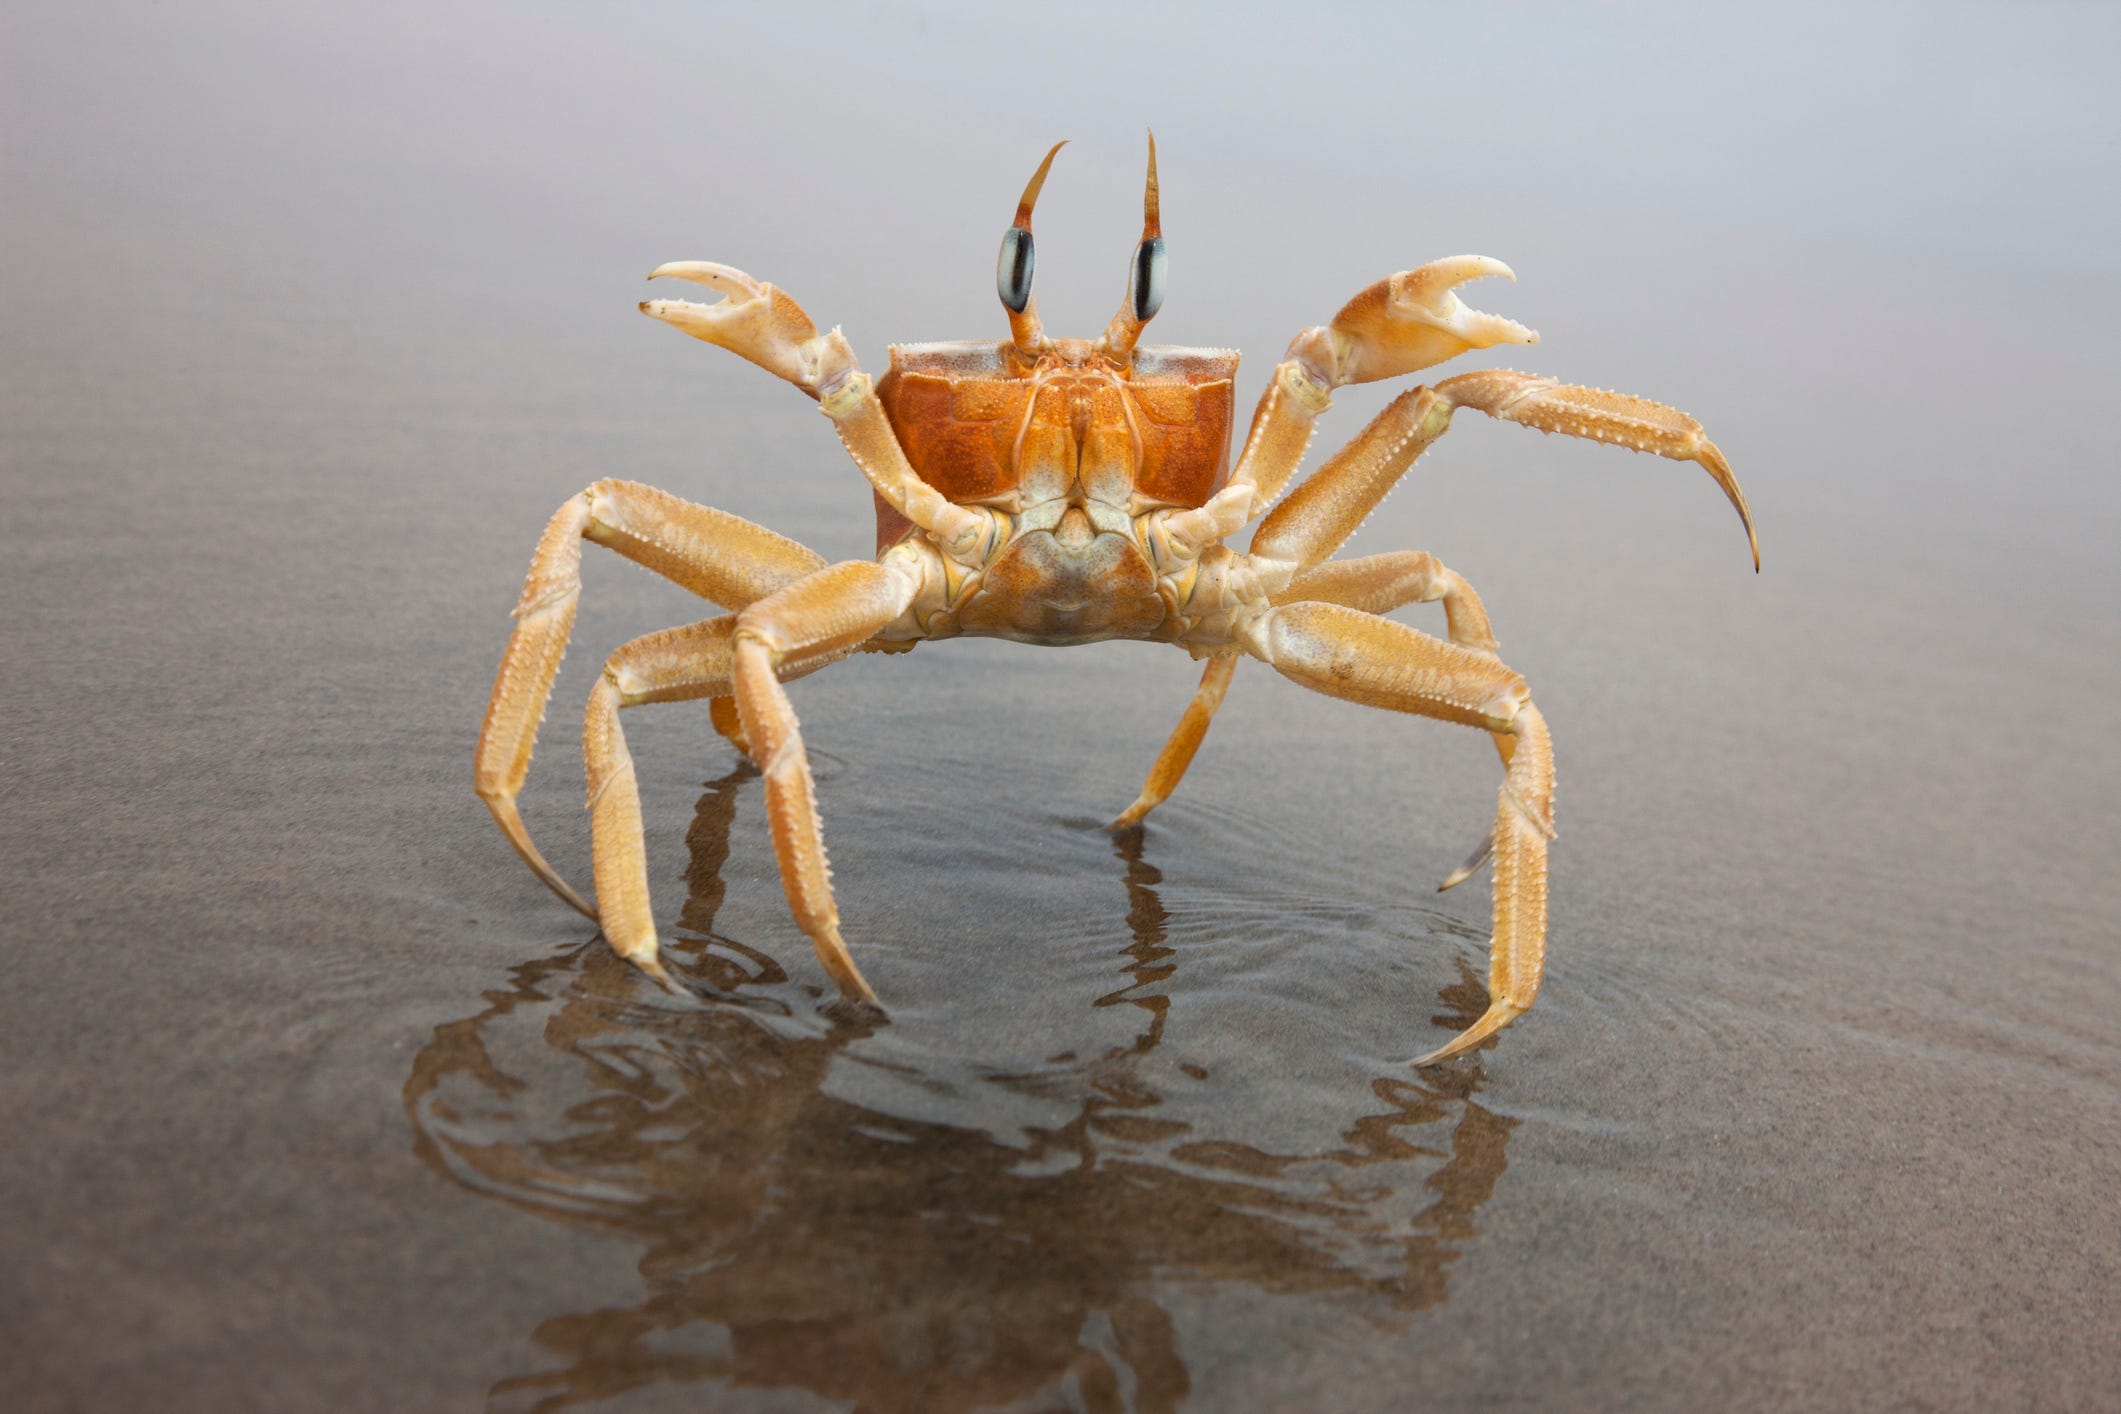 Crabs Keep Migrating Back and Forth From Water to Land, for Some Reason